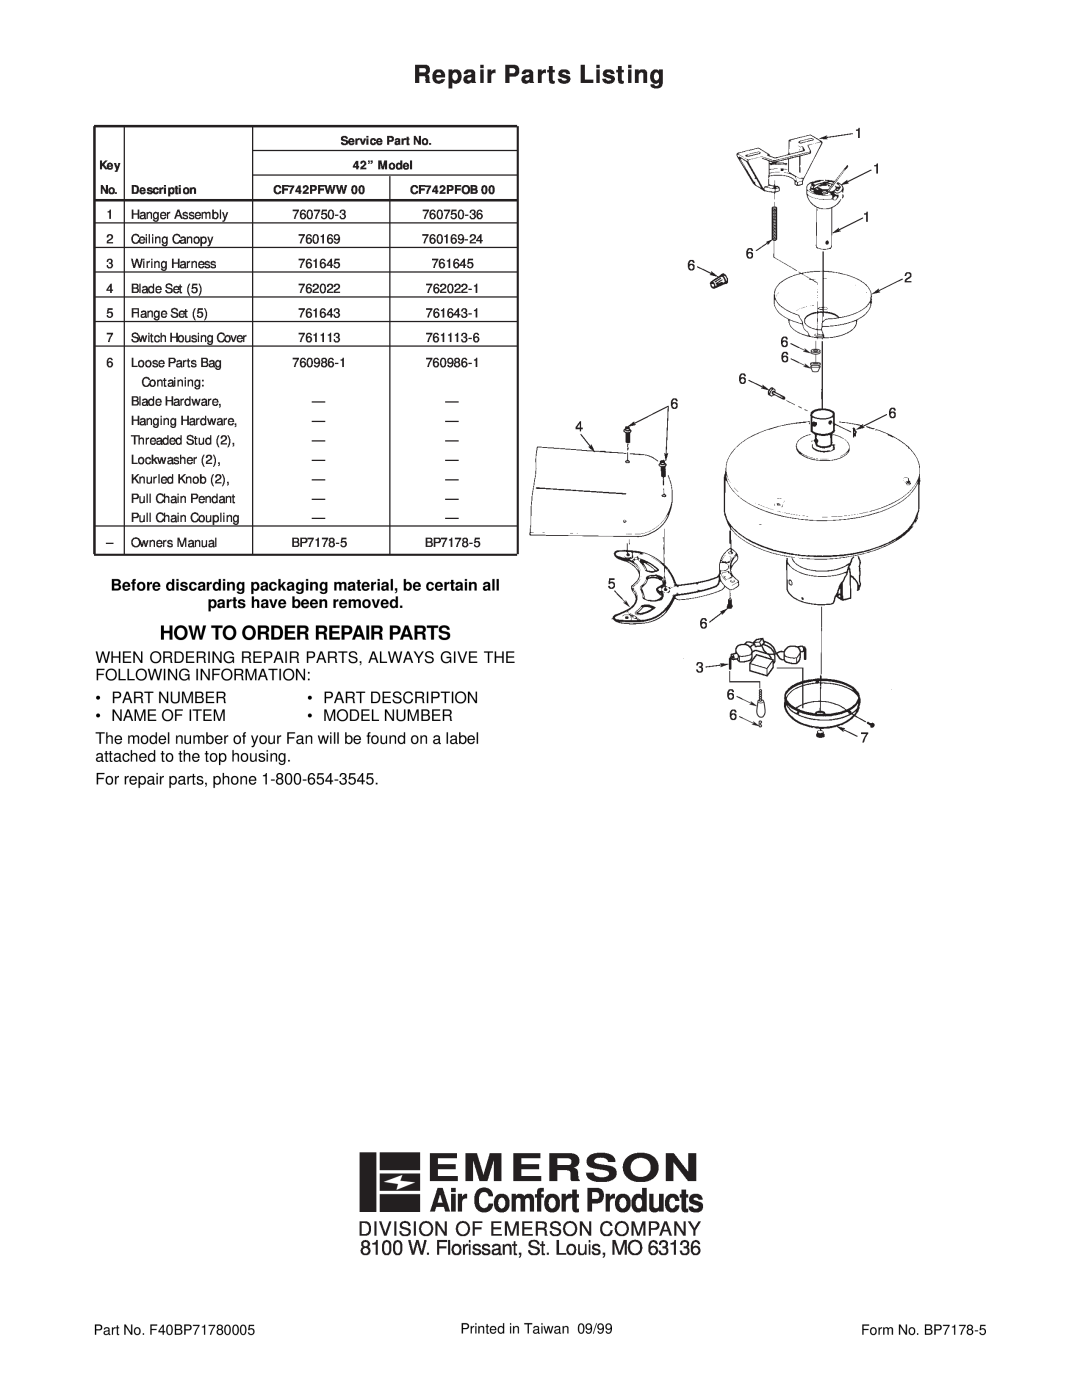 Emerson CF742PFOB Air Comfort Products, Repair Parts Listing, Emerson, How To Order Repair Parts, Following Information 